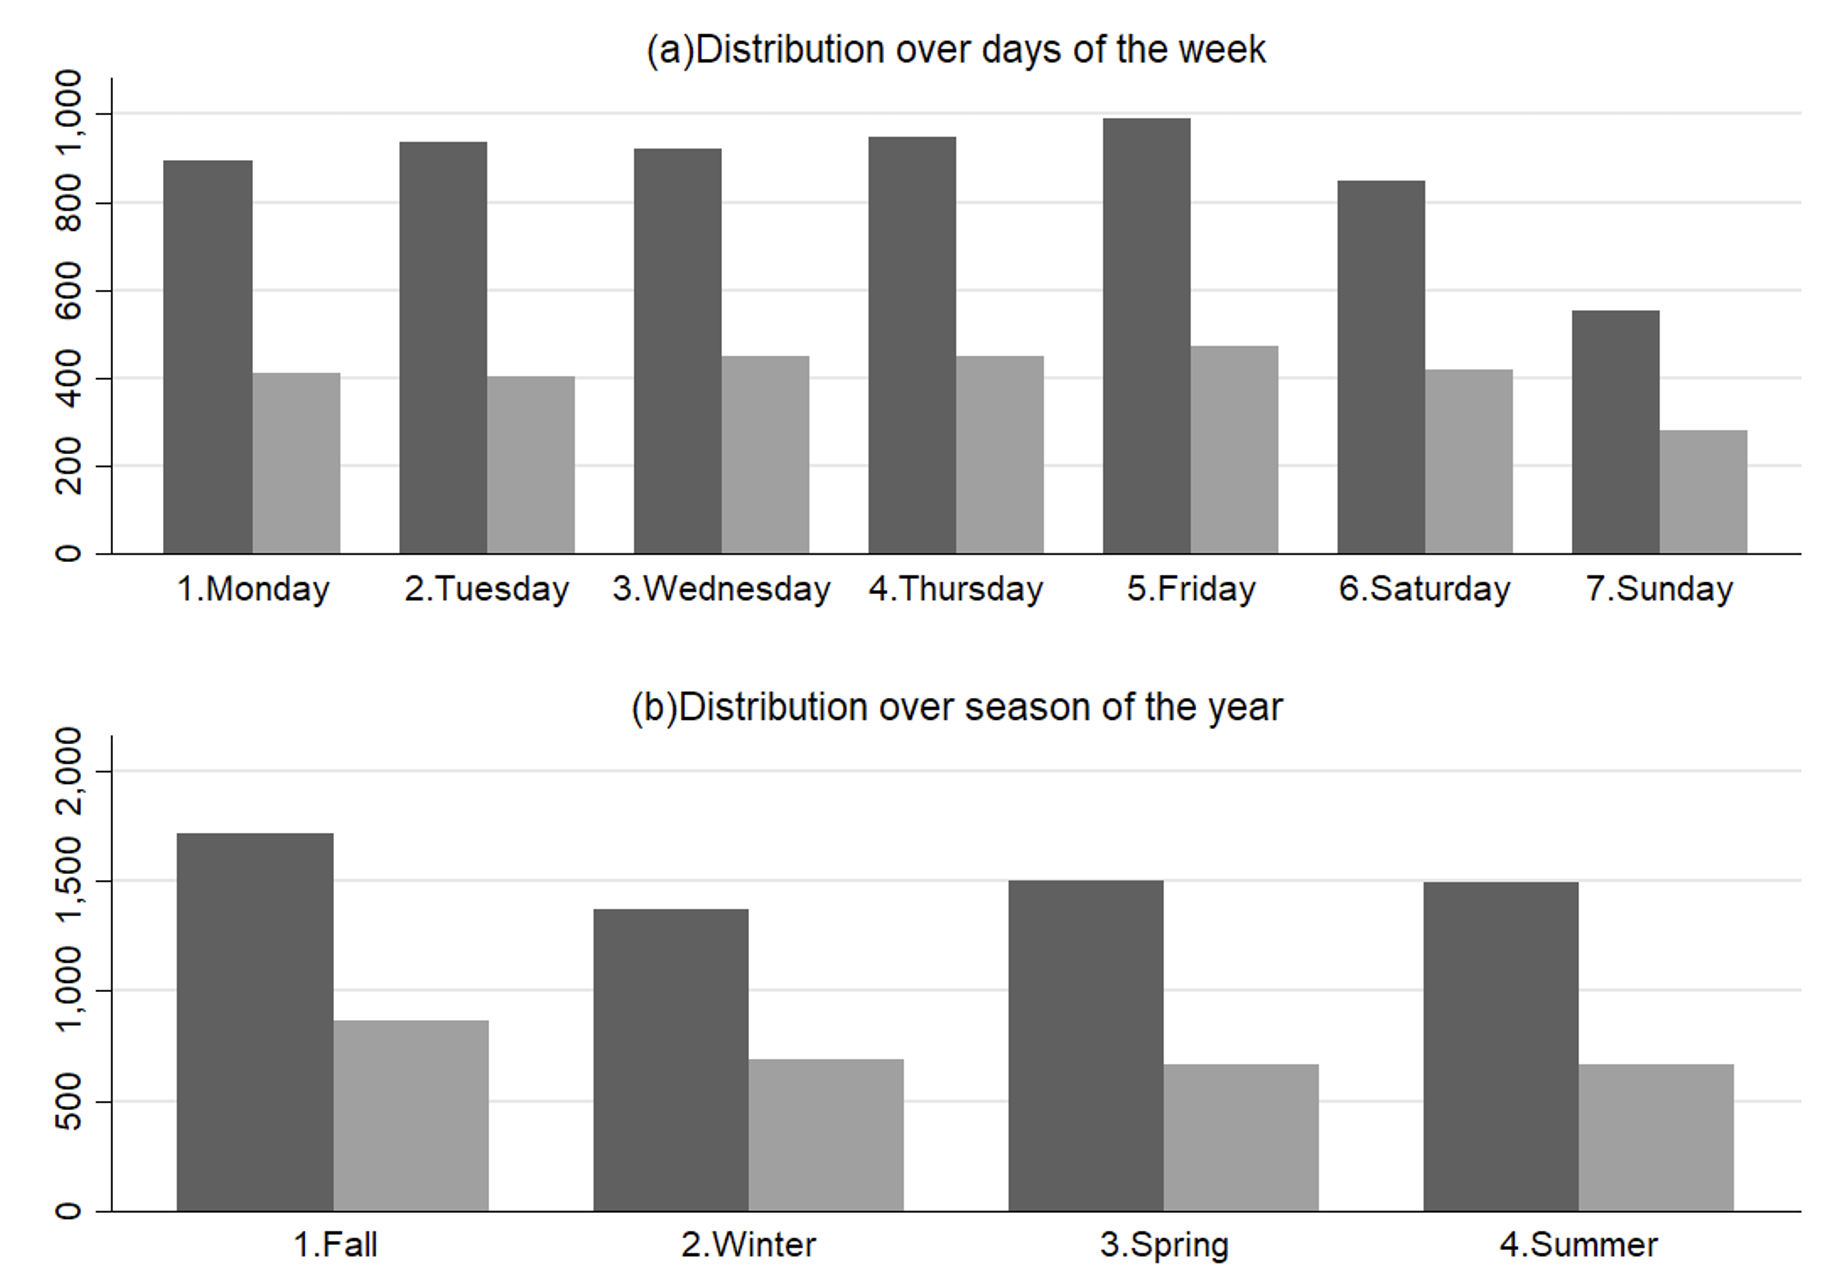 Figure 2 Distribution of Vox columns over days and seasons